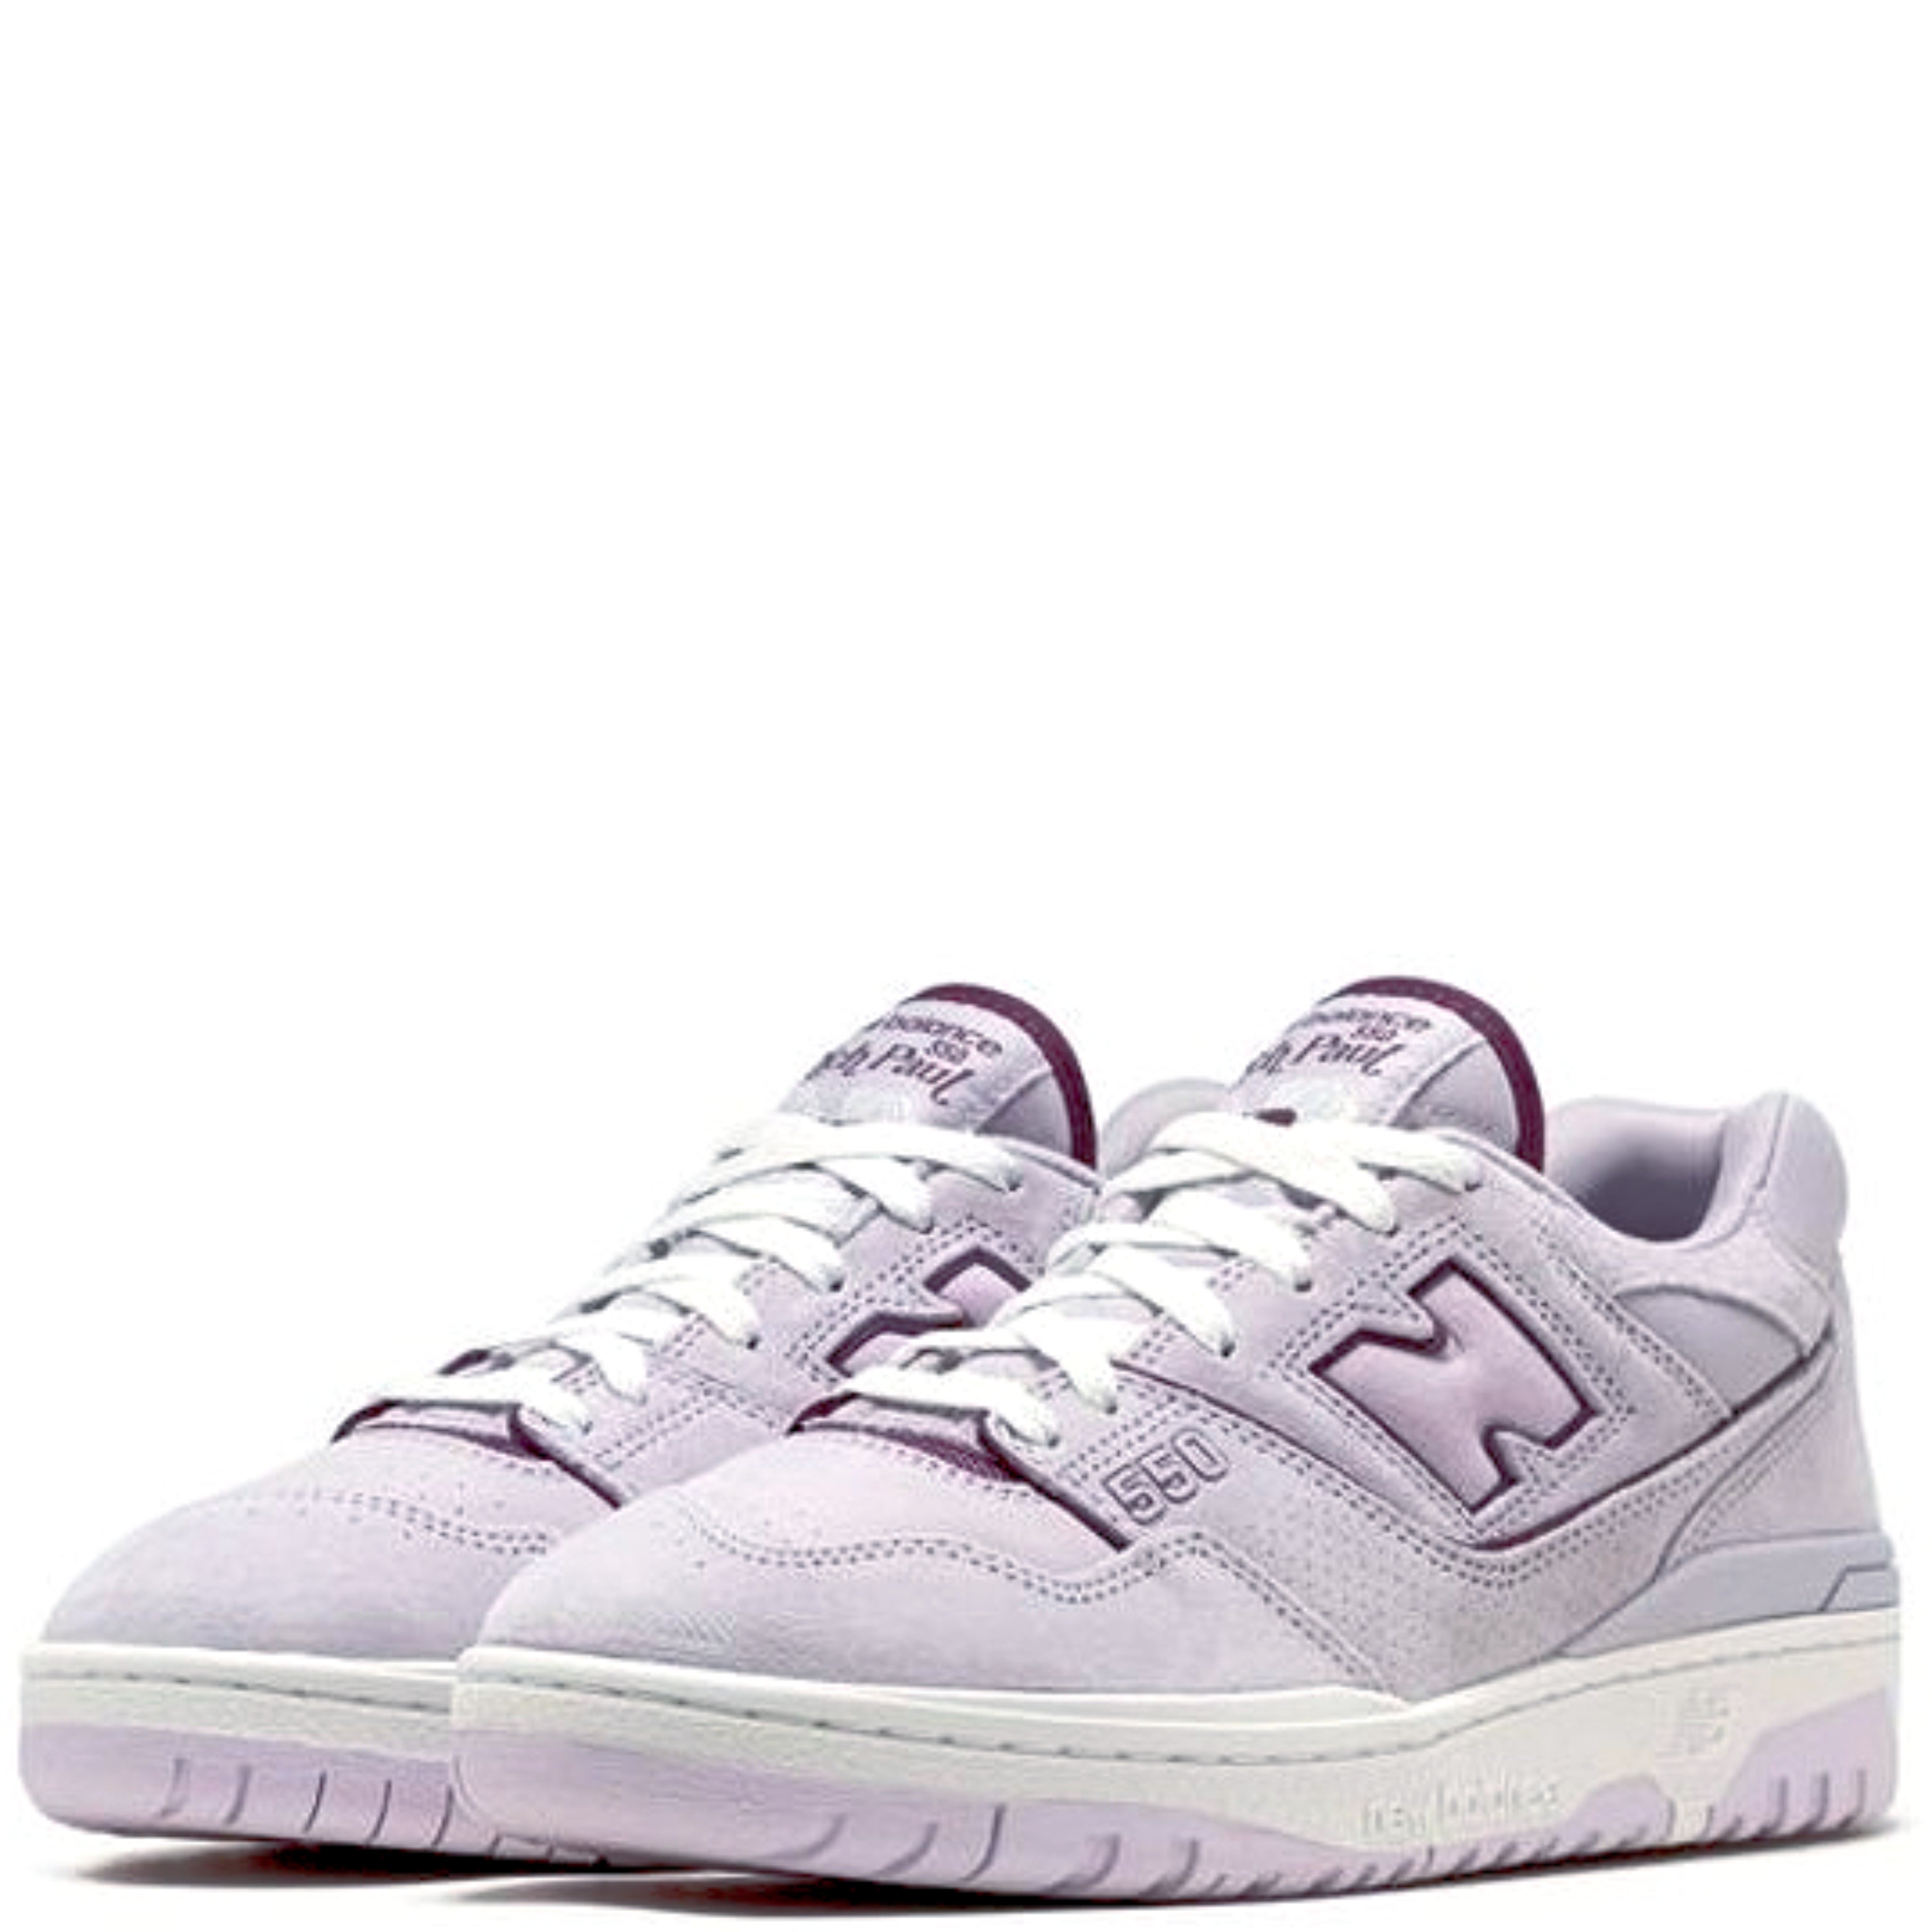 NEW BALANCE X RICH PAUL 550 FOREVER YOURS